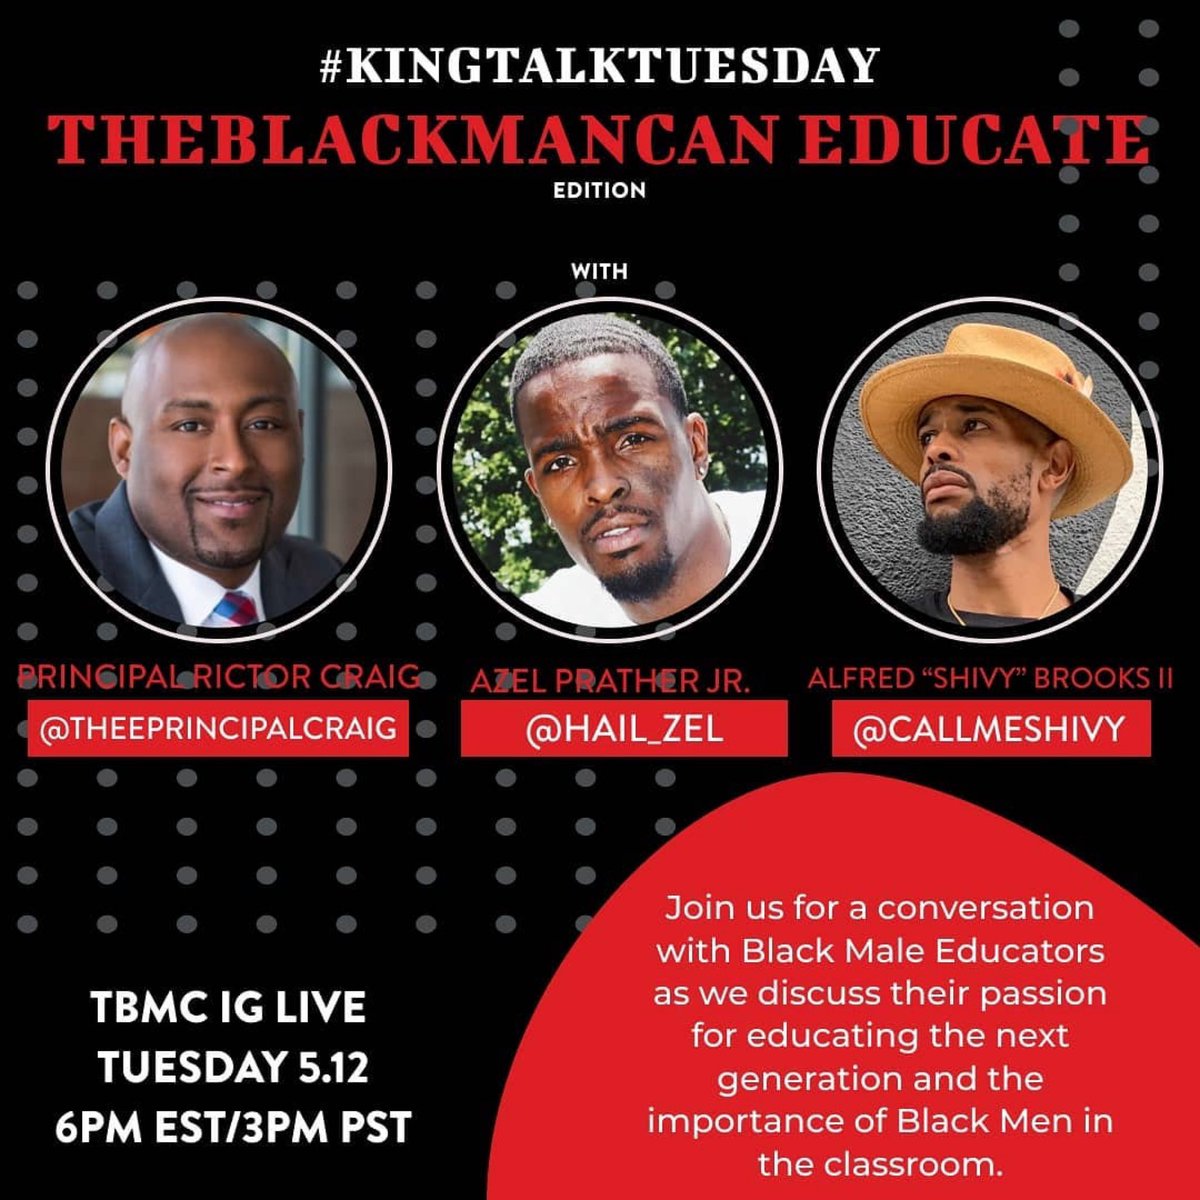 We are excited to join @theeprincipalc2 tonight at 6pm as he joins in on a much needed conversation about #BlackMen in the classroom! We hope you tune in with @callmeshivy and @hail_zel hosted by @theblackmancan!#theblackmancan #blackmalemodels #blackeducators #StatesmenWay